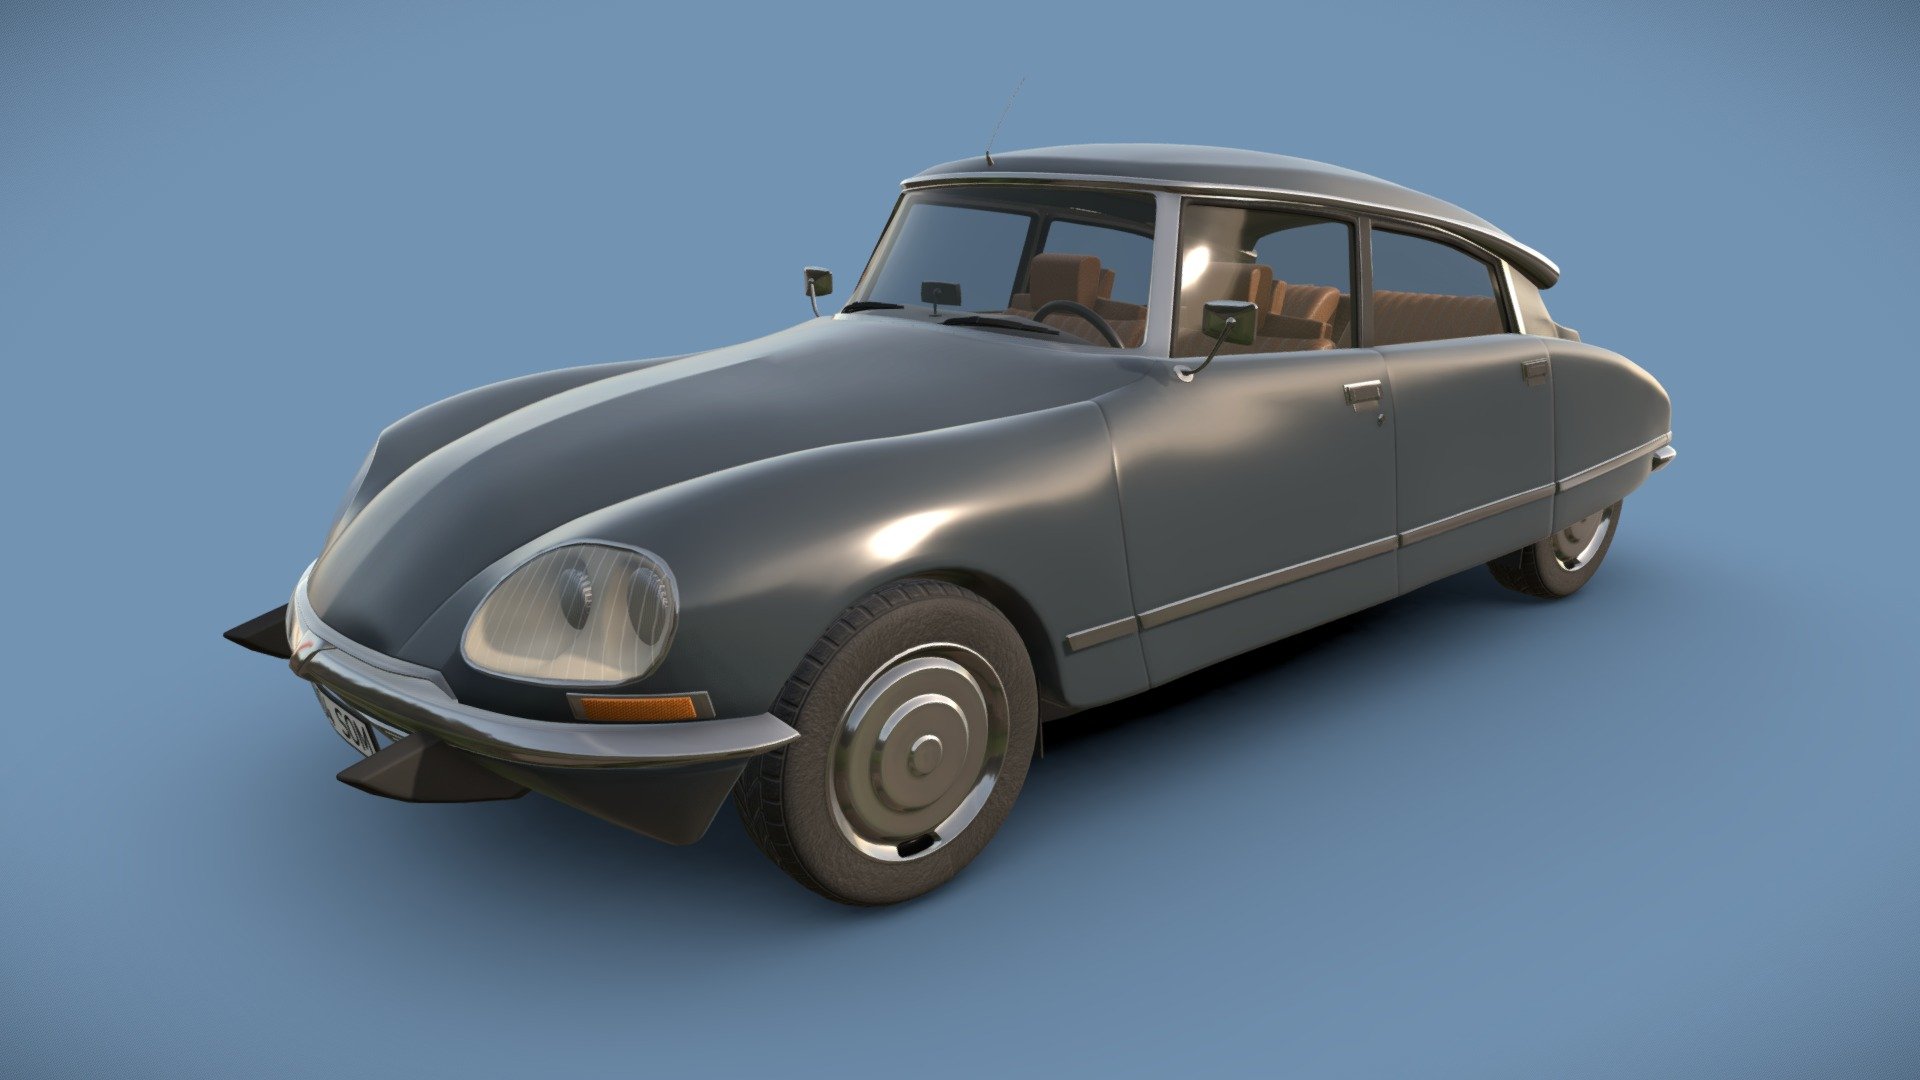 3D model of a Citroen DS23 from 1974, UV mapped and texturized. 

The model consists of a high detail exterior of the car, with a basic interior with the seats, the steering wheel and some other minor details. 3D model divided in 2 meshes with 2 different materials, one for the exterior and the other for the interior, both with 4K textures.  

Exterior total triangle count: 261922.
Interior total triangle count: 165760.
Total triangle count: 427682 3d model